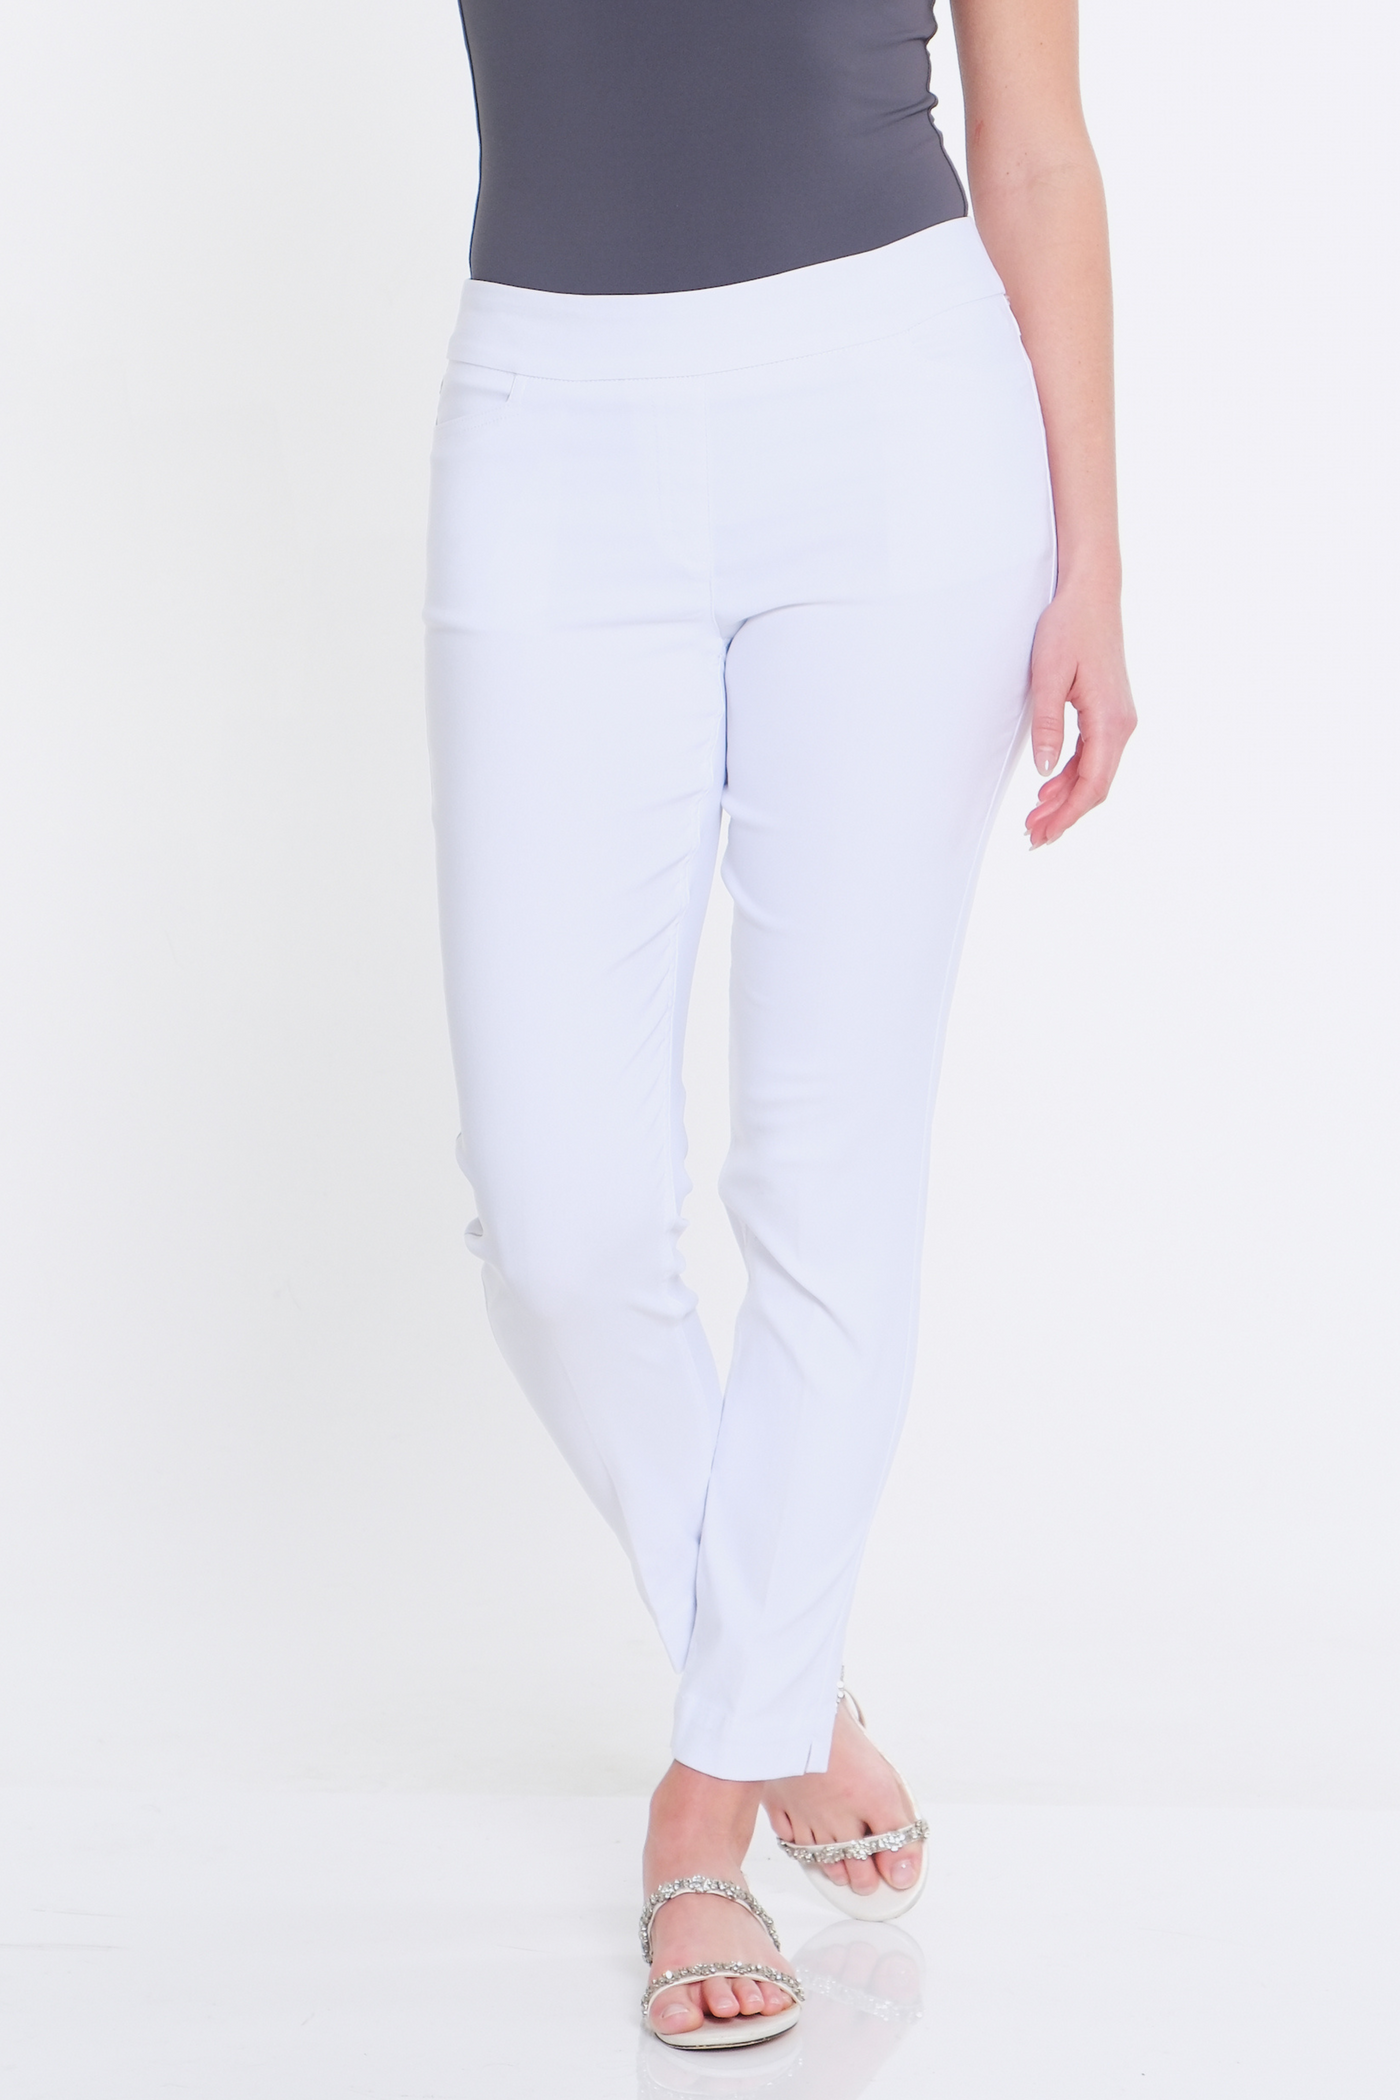 PLUS PULL-ON ANKLE PANT WITH REAL FRONT AND BACK POCKETS - Women's - White